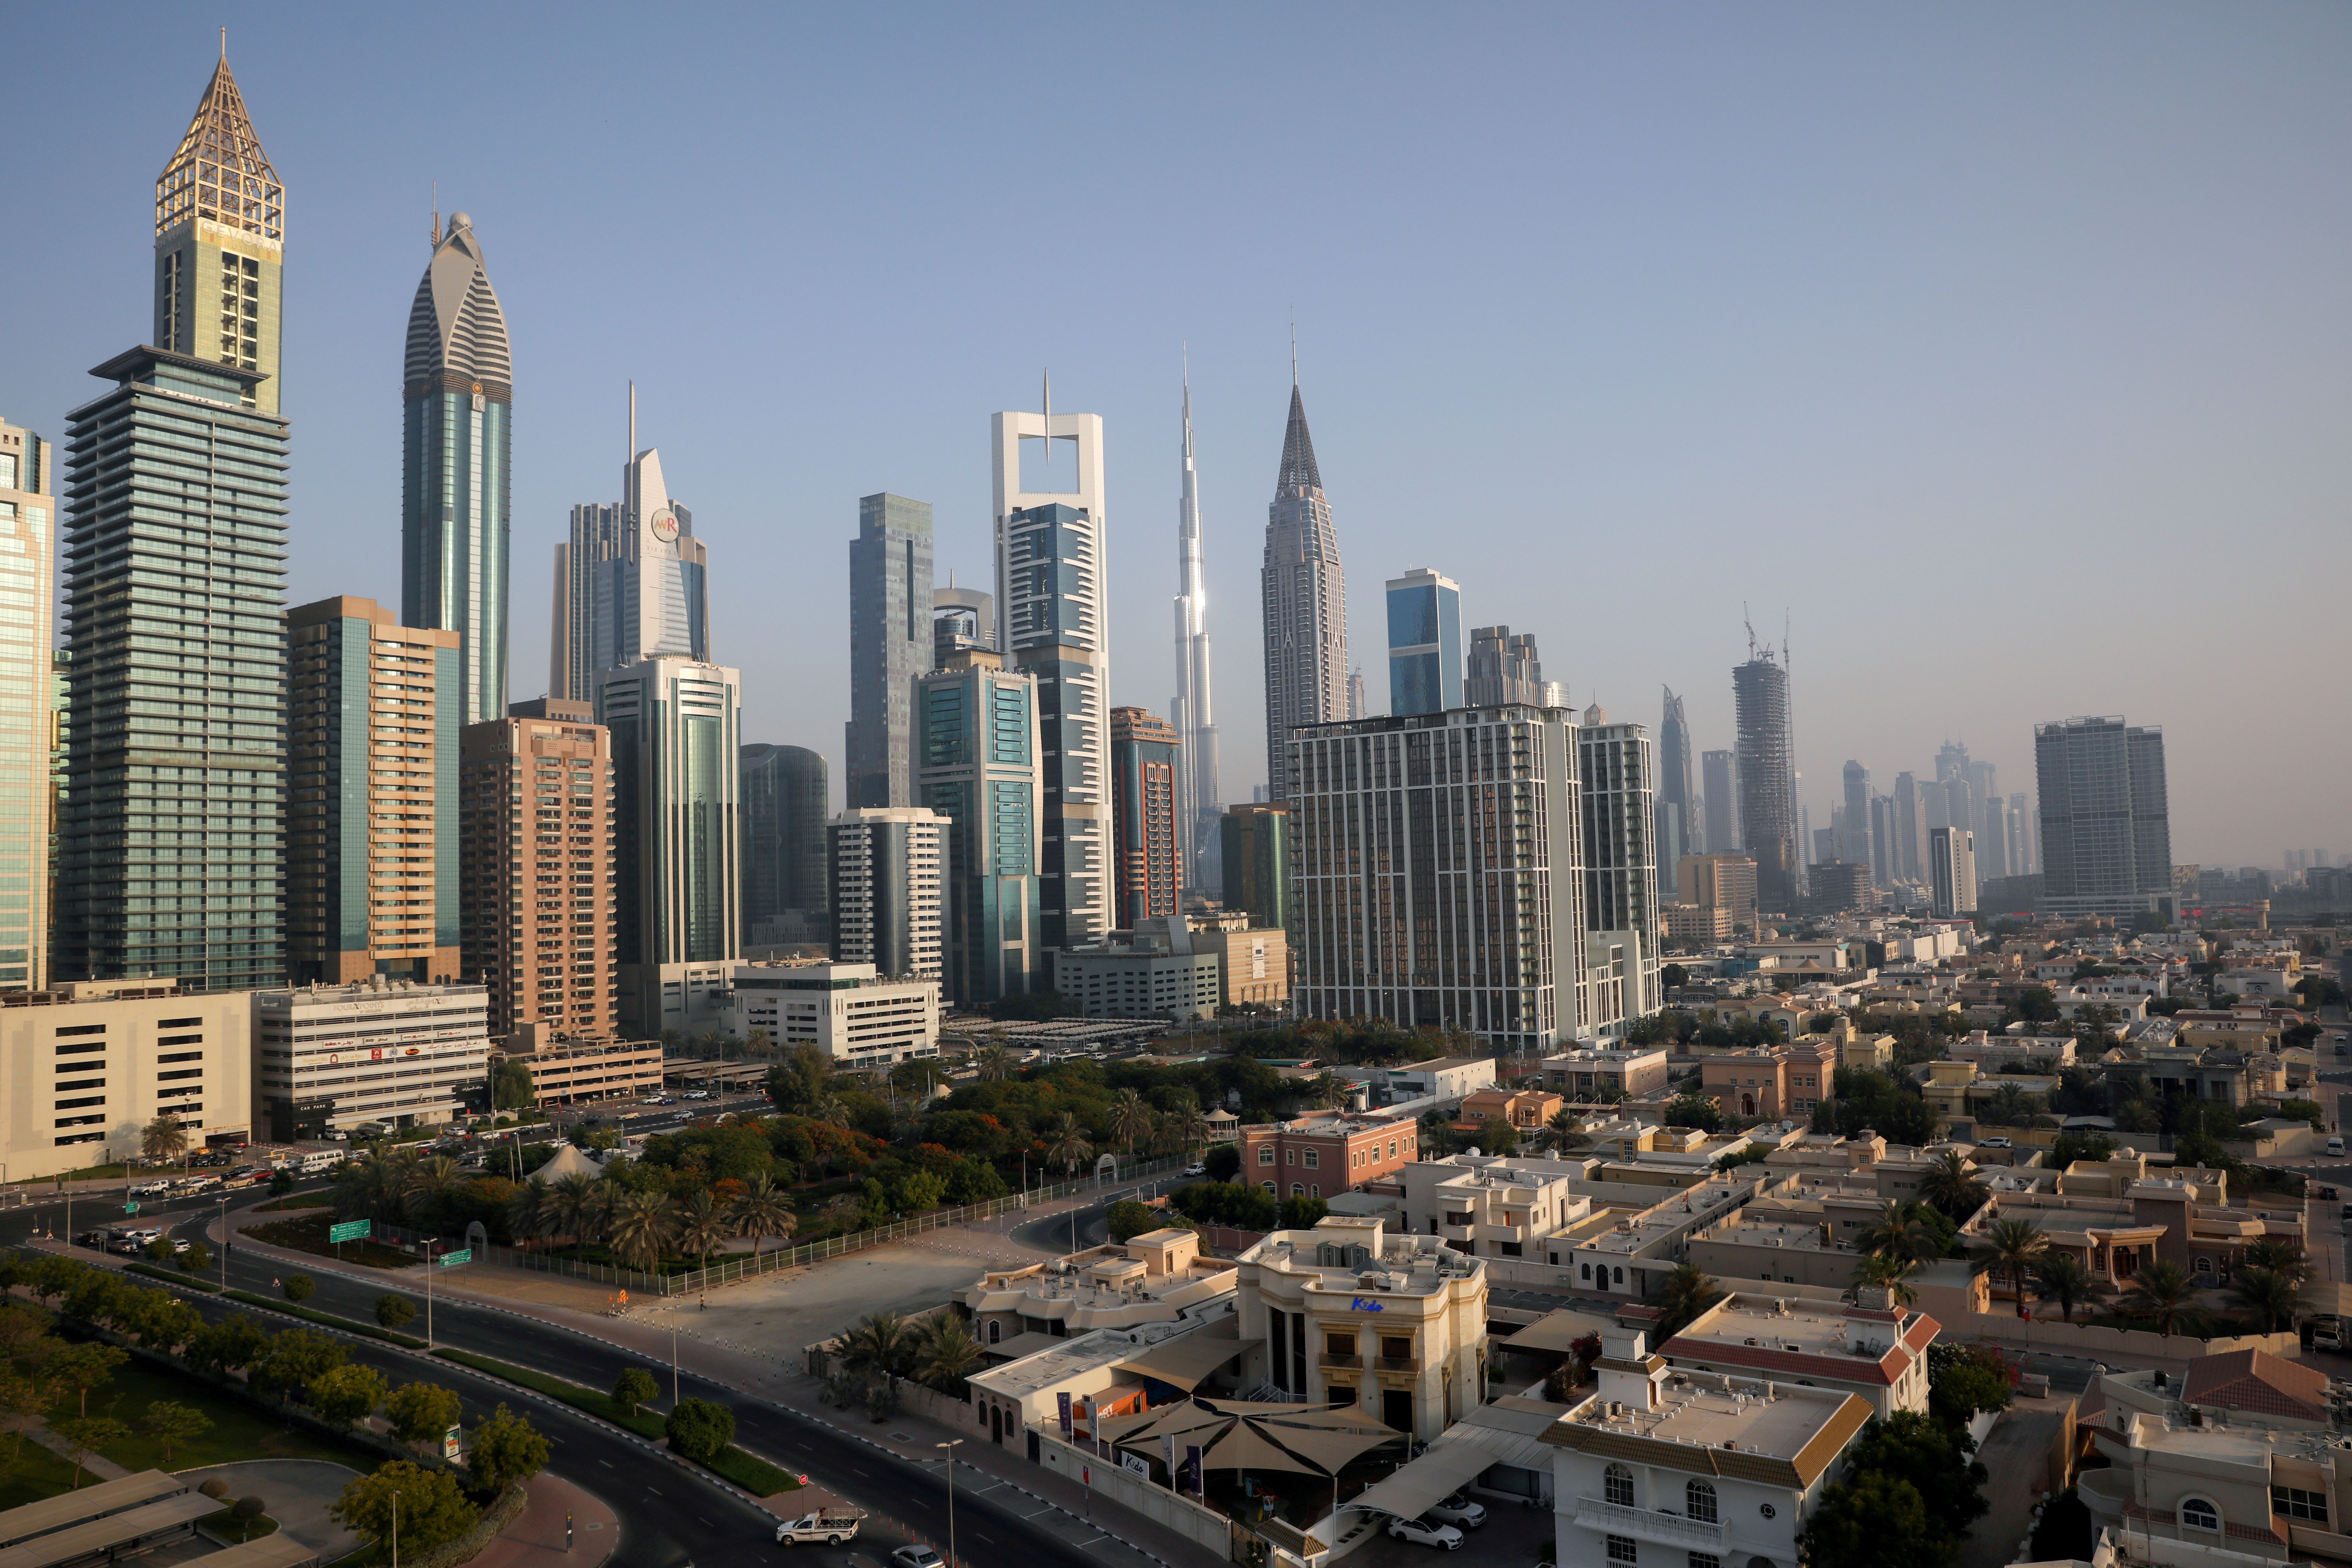 A general view of the Burj Khalifa and the downtown skyline in Dubai